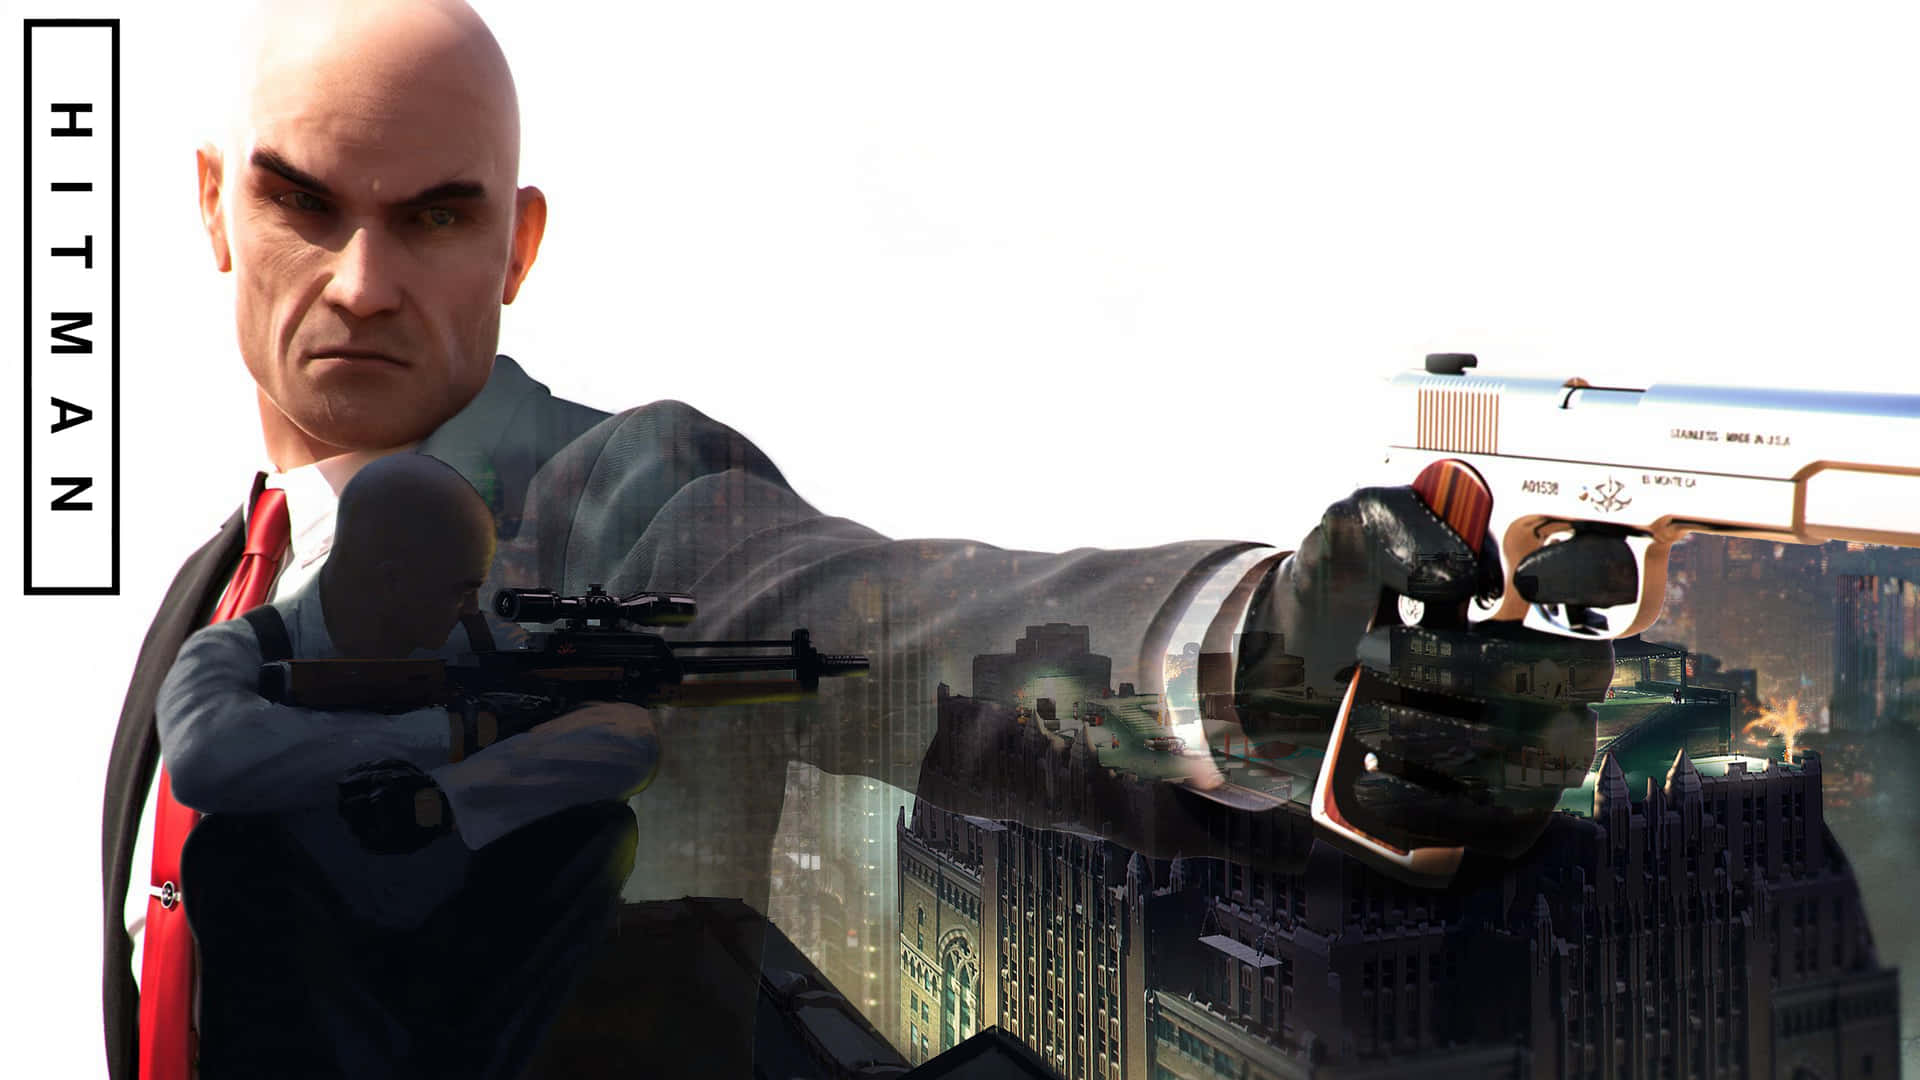 Assassin In Action: Agent 47 Setting Ambush In Hitman Absolution